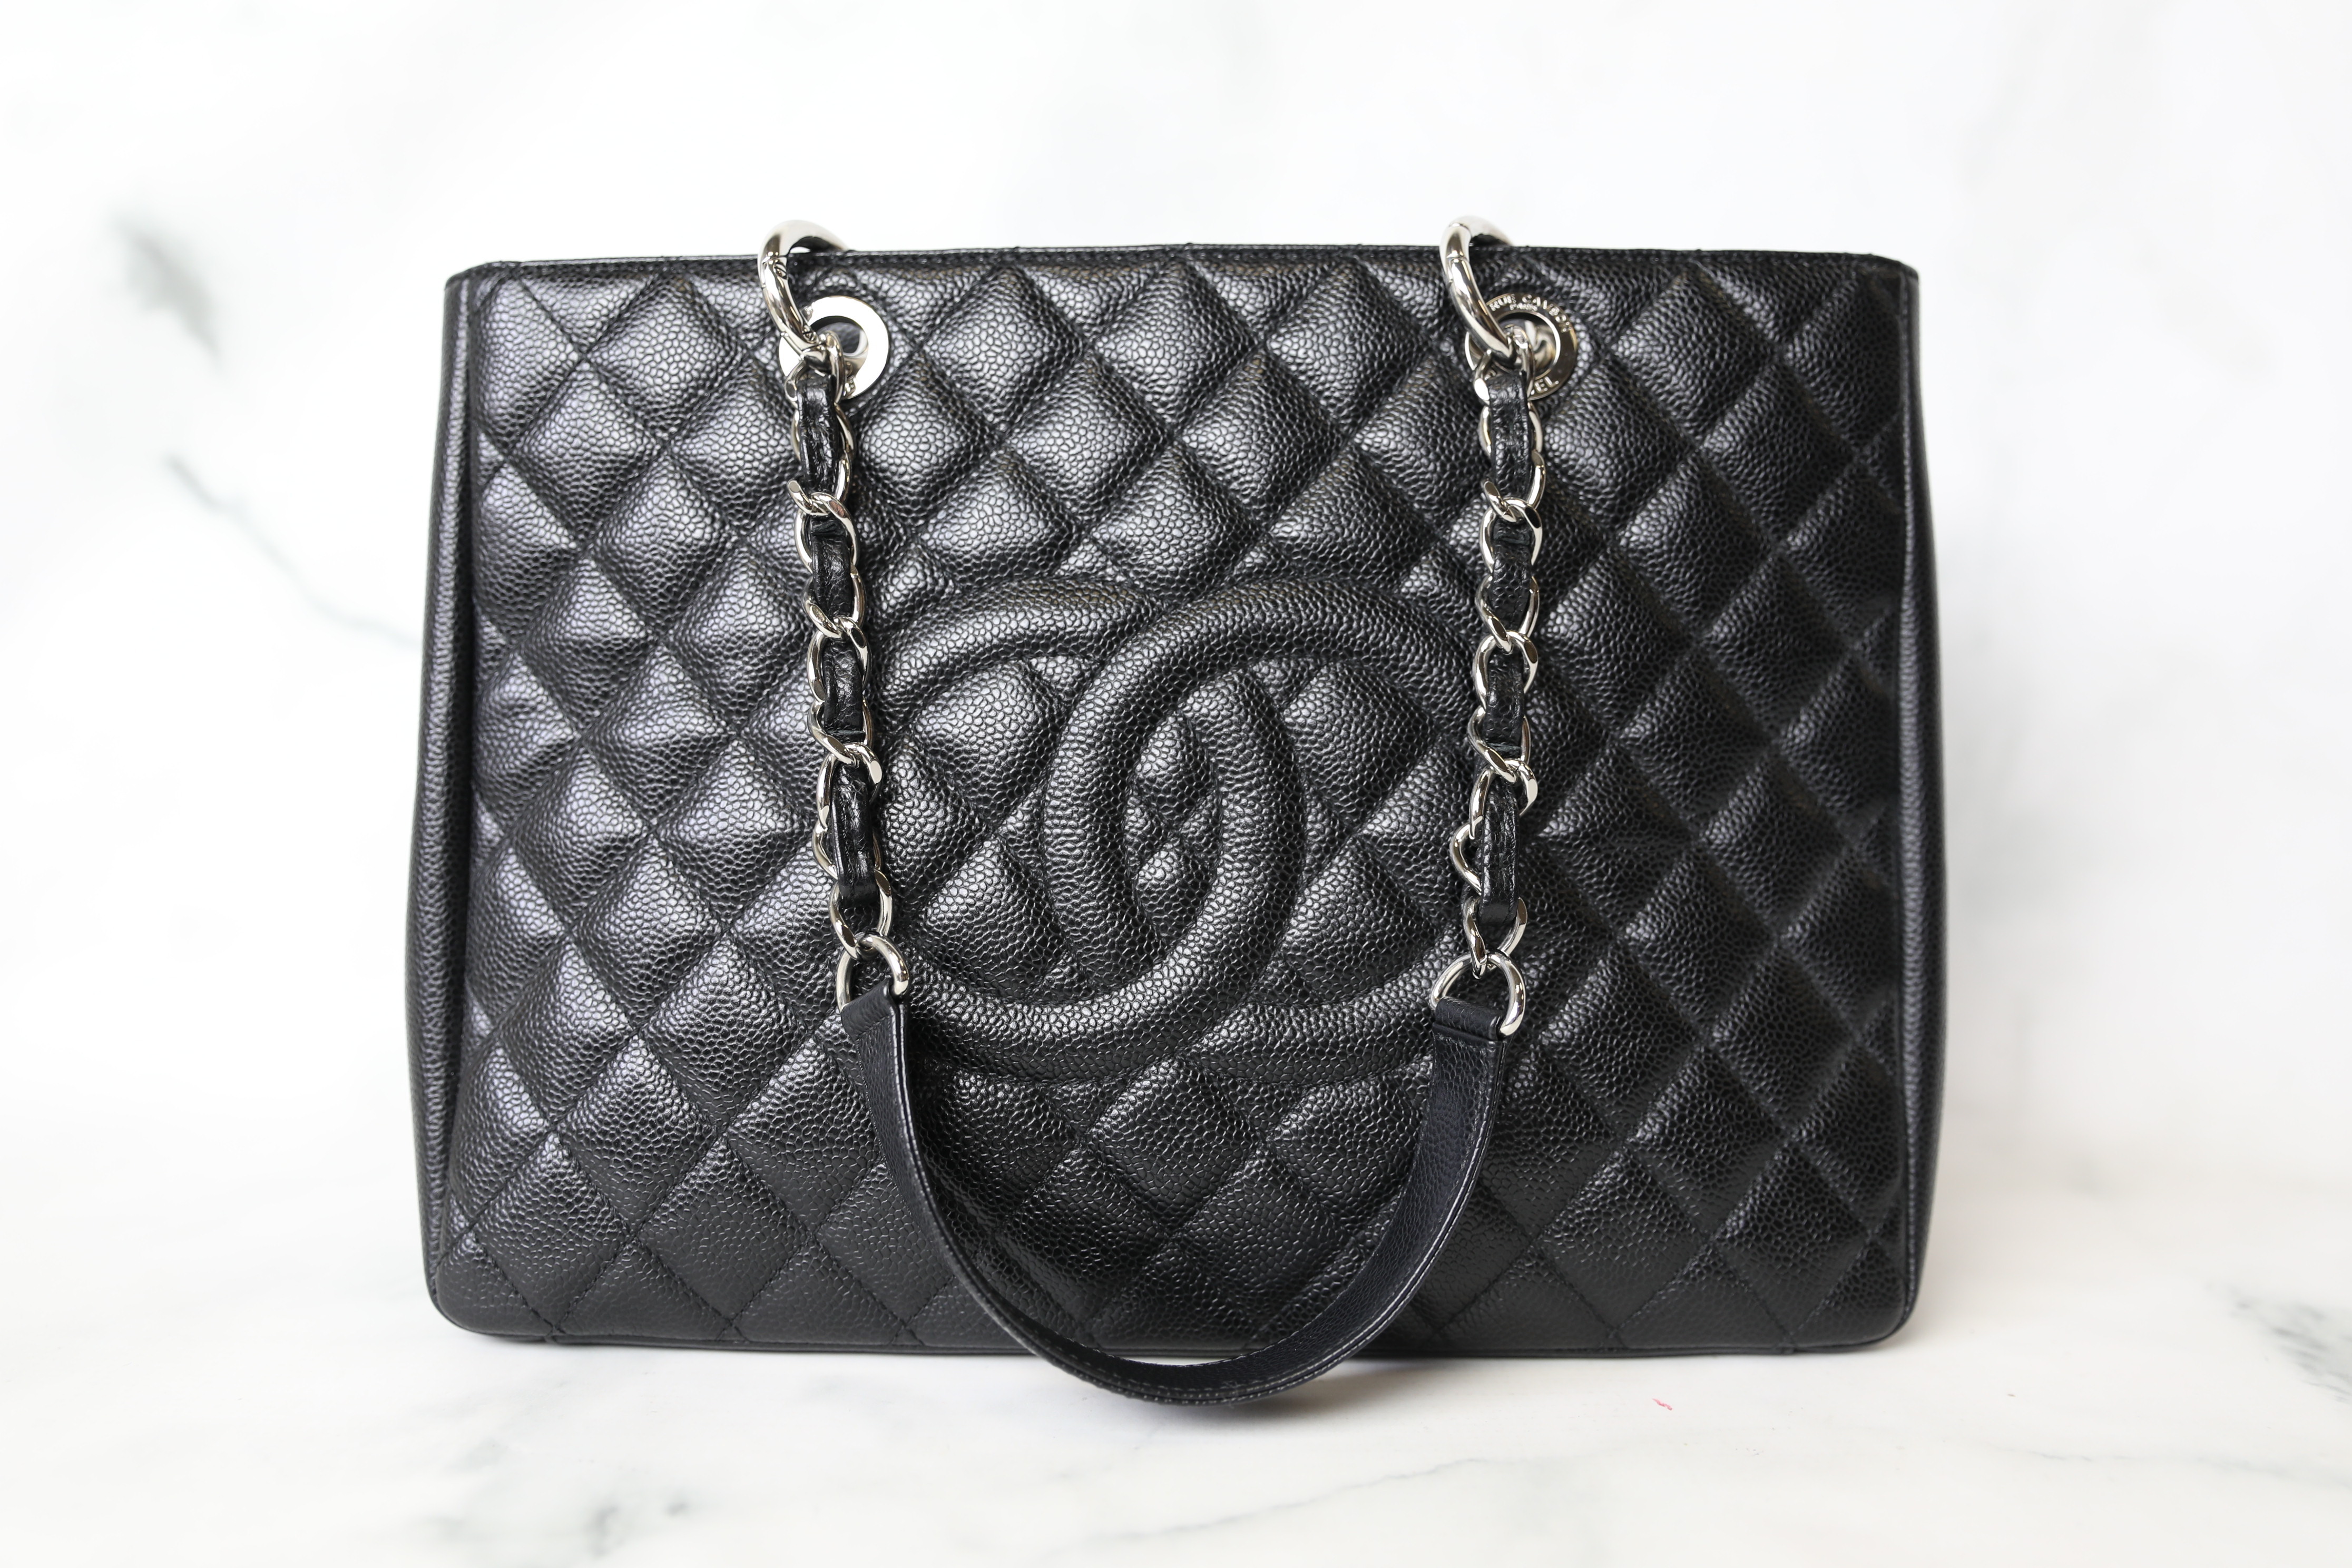 Review CHANEL GST, Grand Shopping Tote, Pros & Cons, Wear & Tear